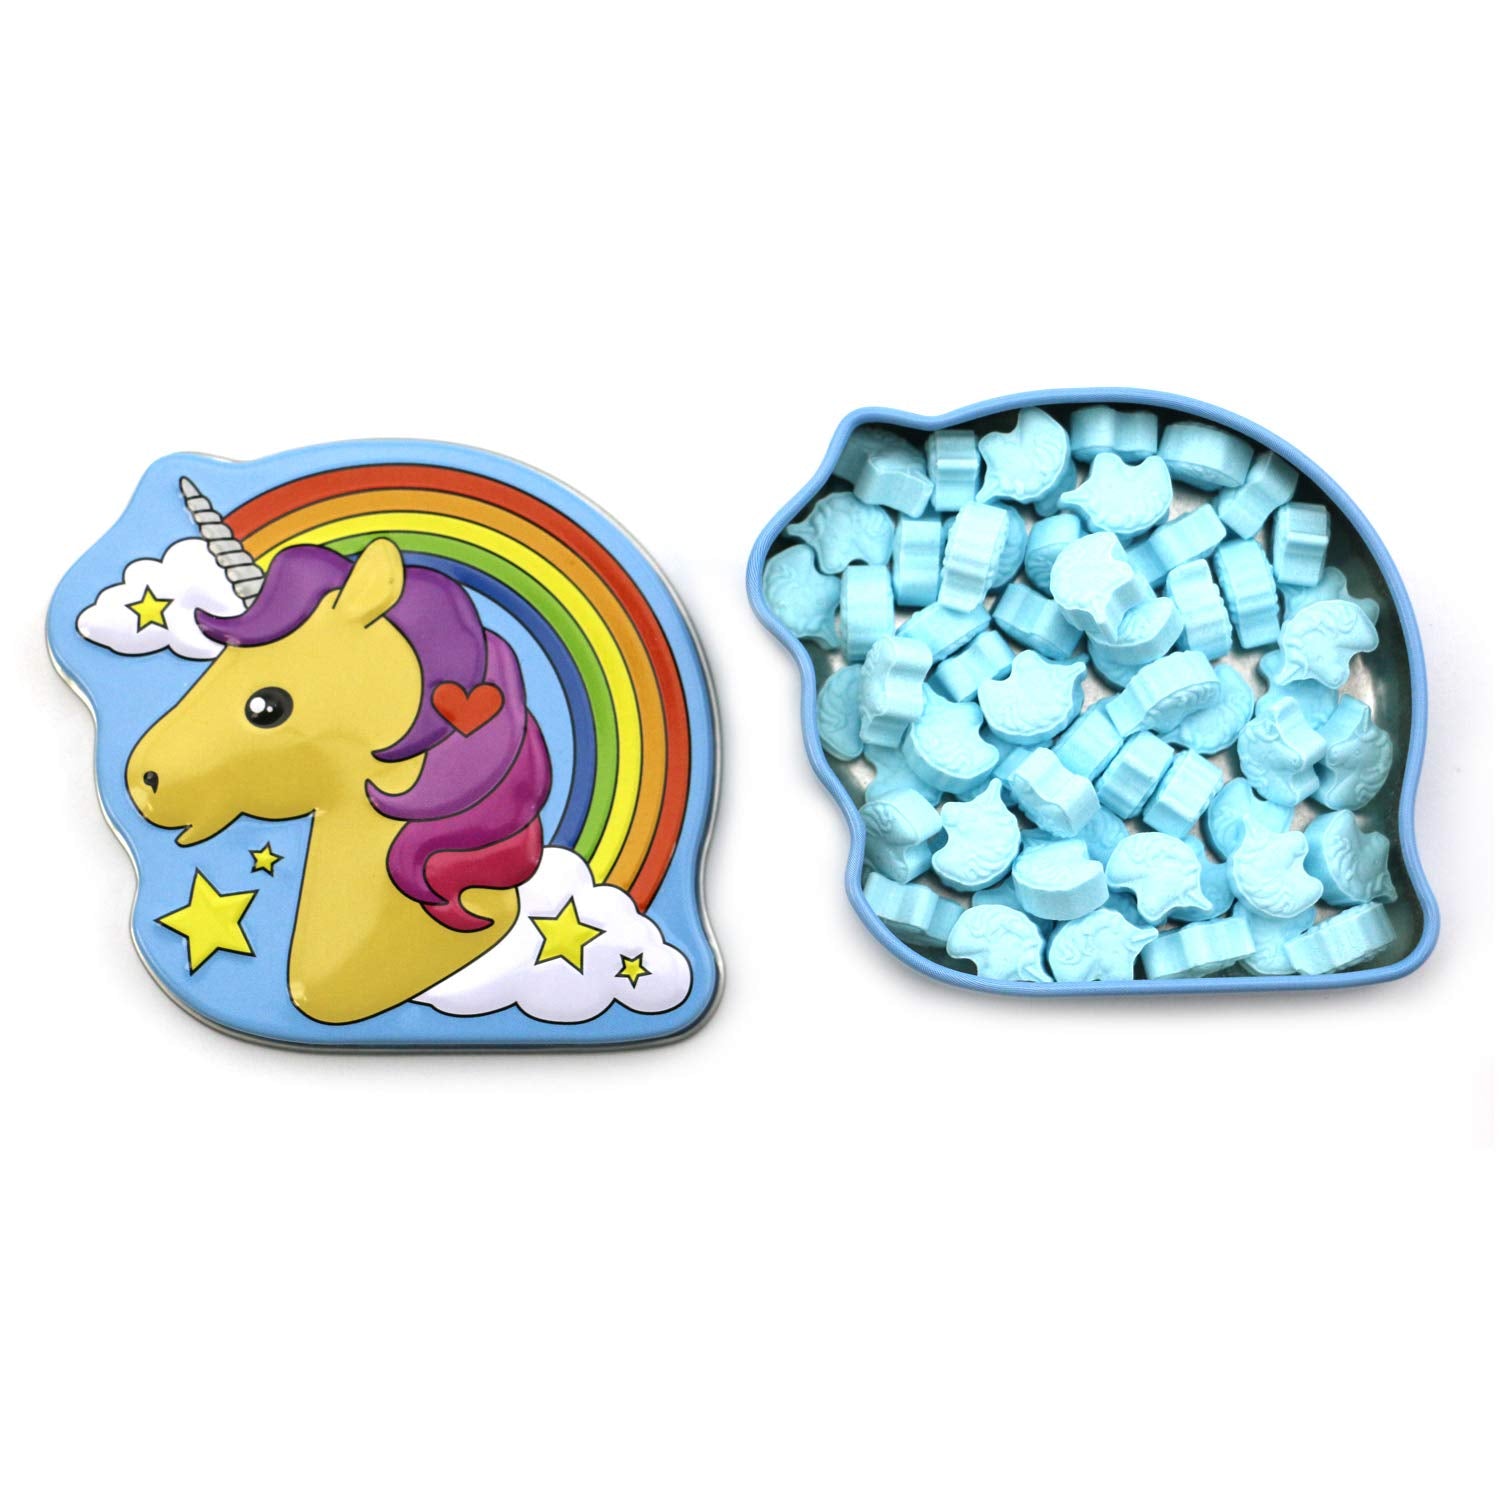 Rainbow Unicorn and Narwhal Unicorn of the Sea Tin Candy (2 Pack) Marshmallow, Berry Flavors Gift Stuffer with 2 GosuToys Stickers